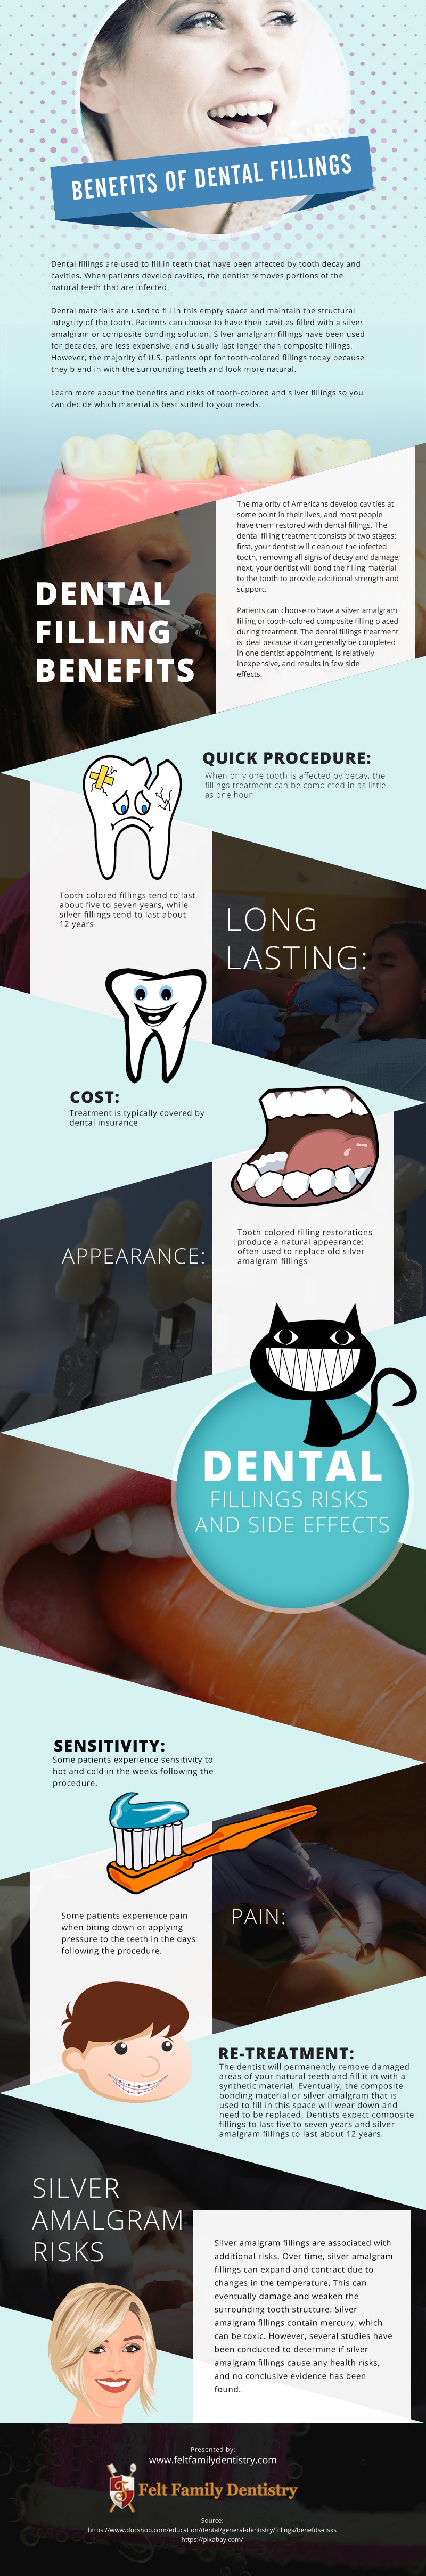 Benefits of Dental Fillings [infographic]